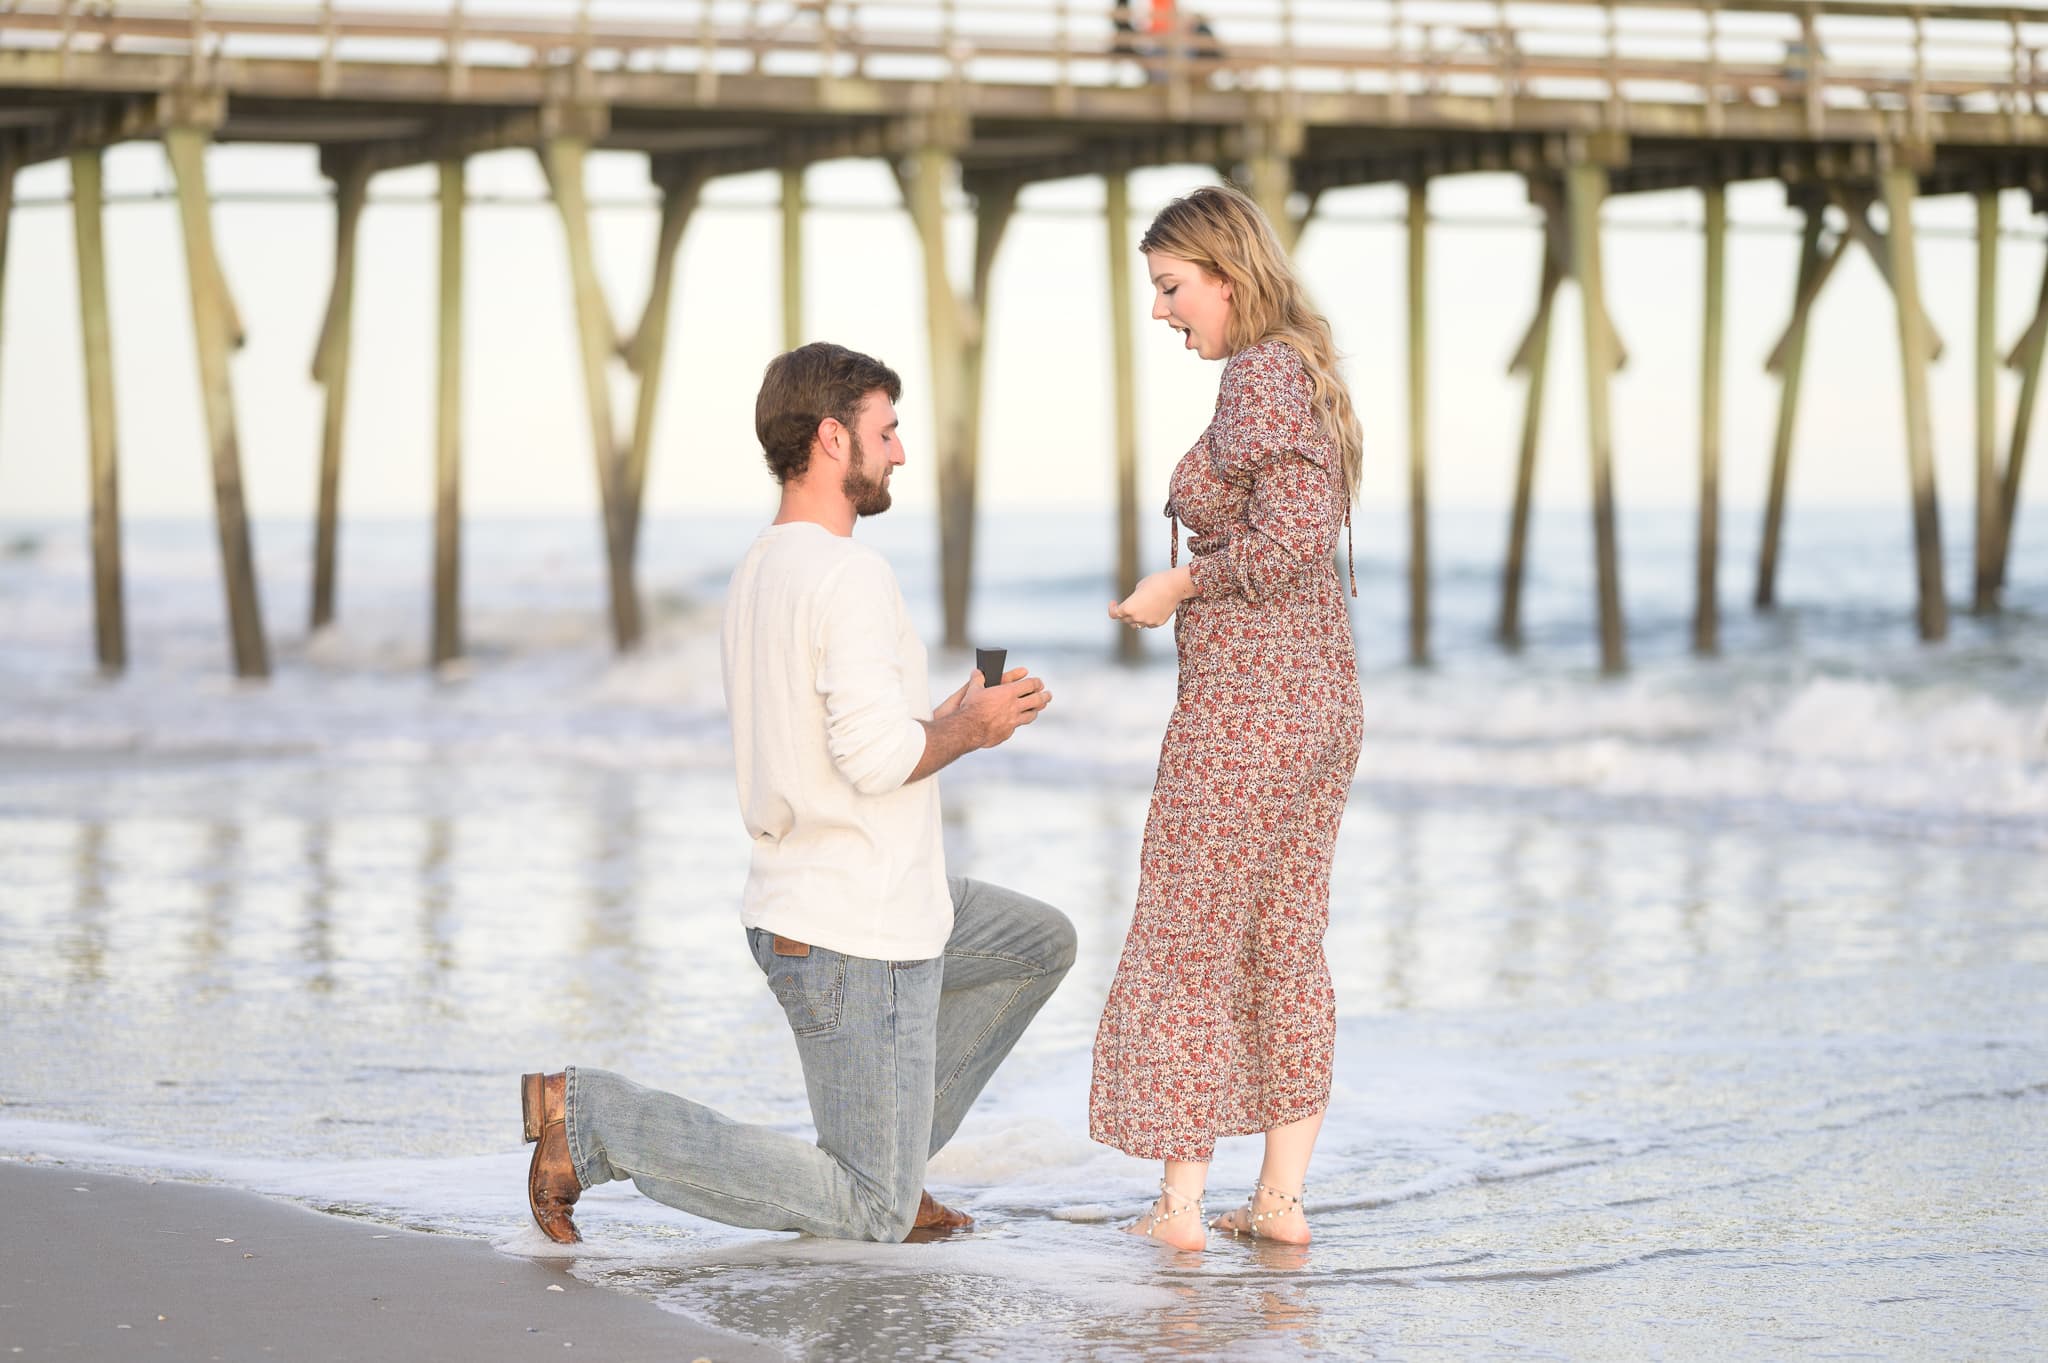 Getting down on a knee for surprise proposal by the pier - Myrtle Beach State Park